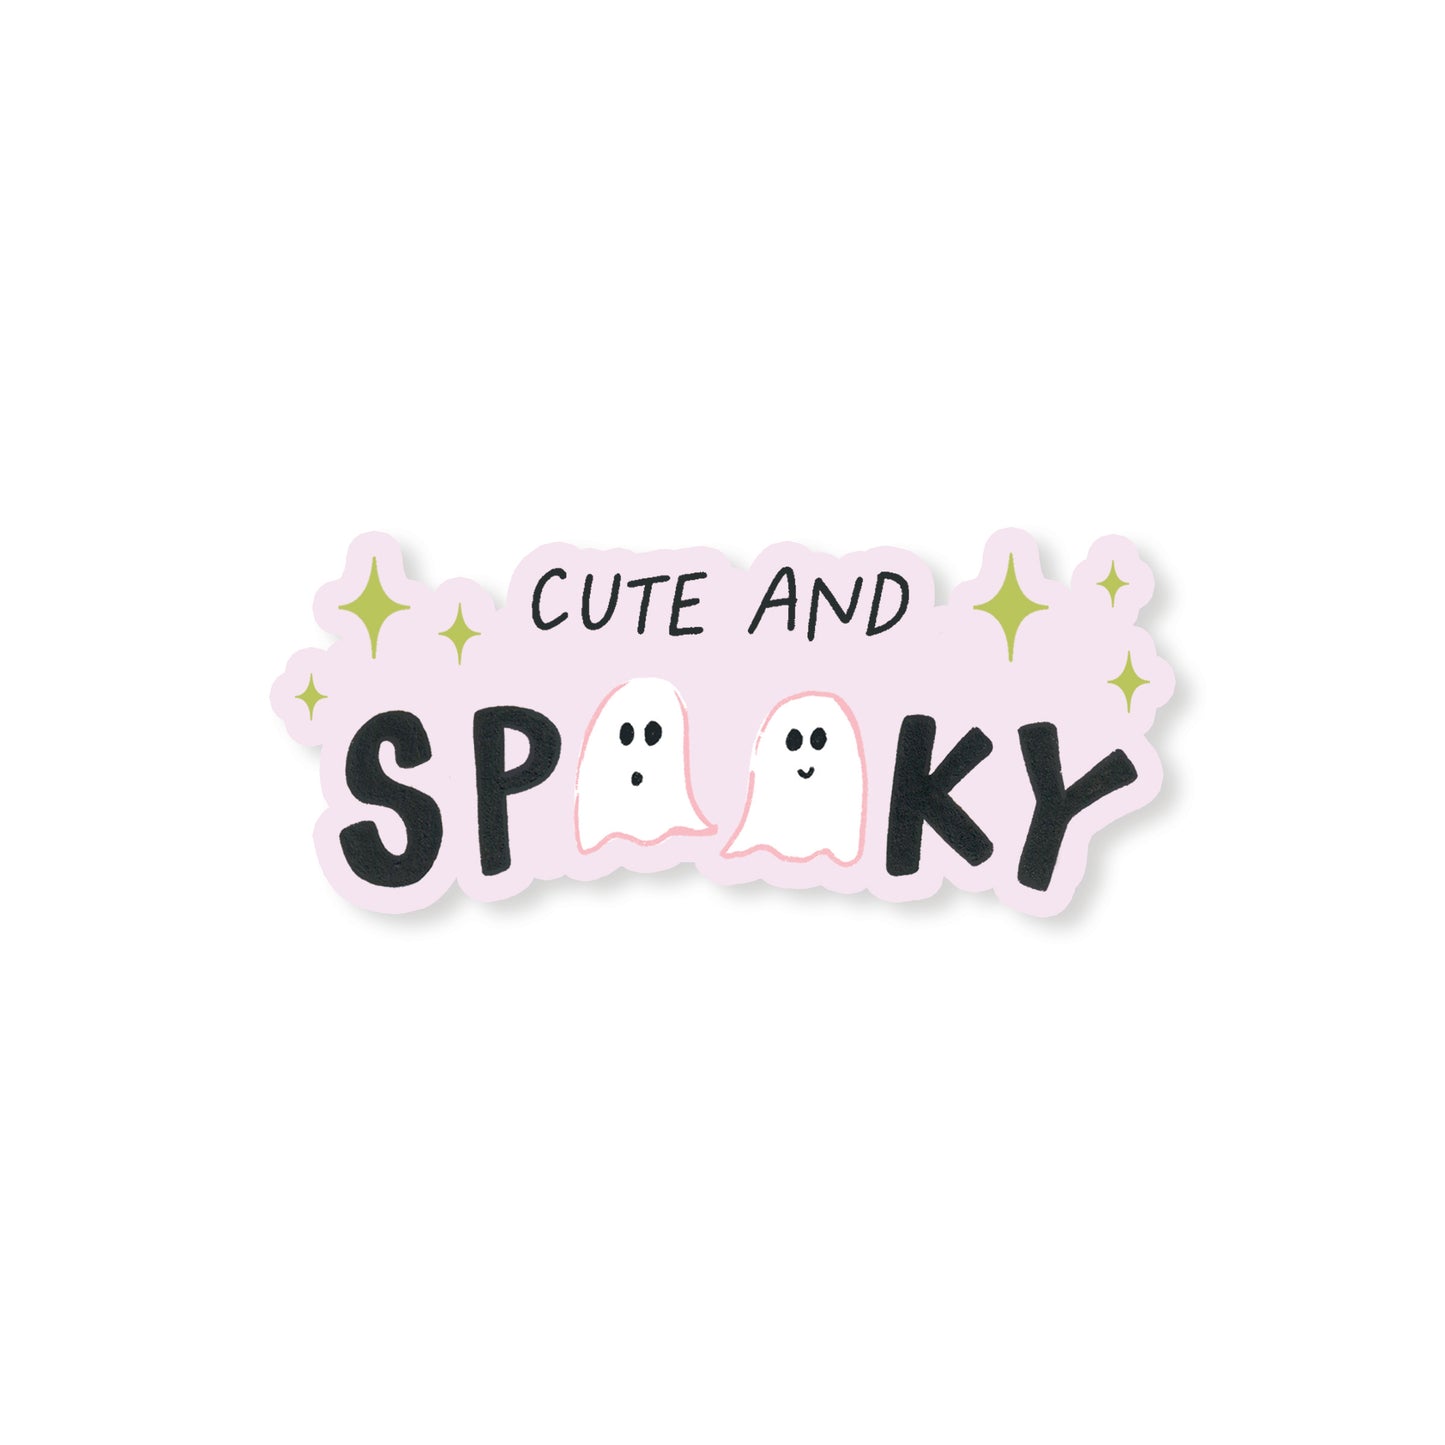 Cute and Spooky Halloween Sticker